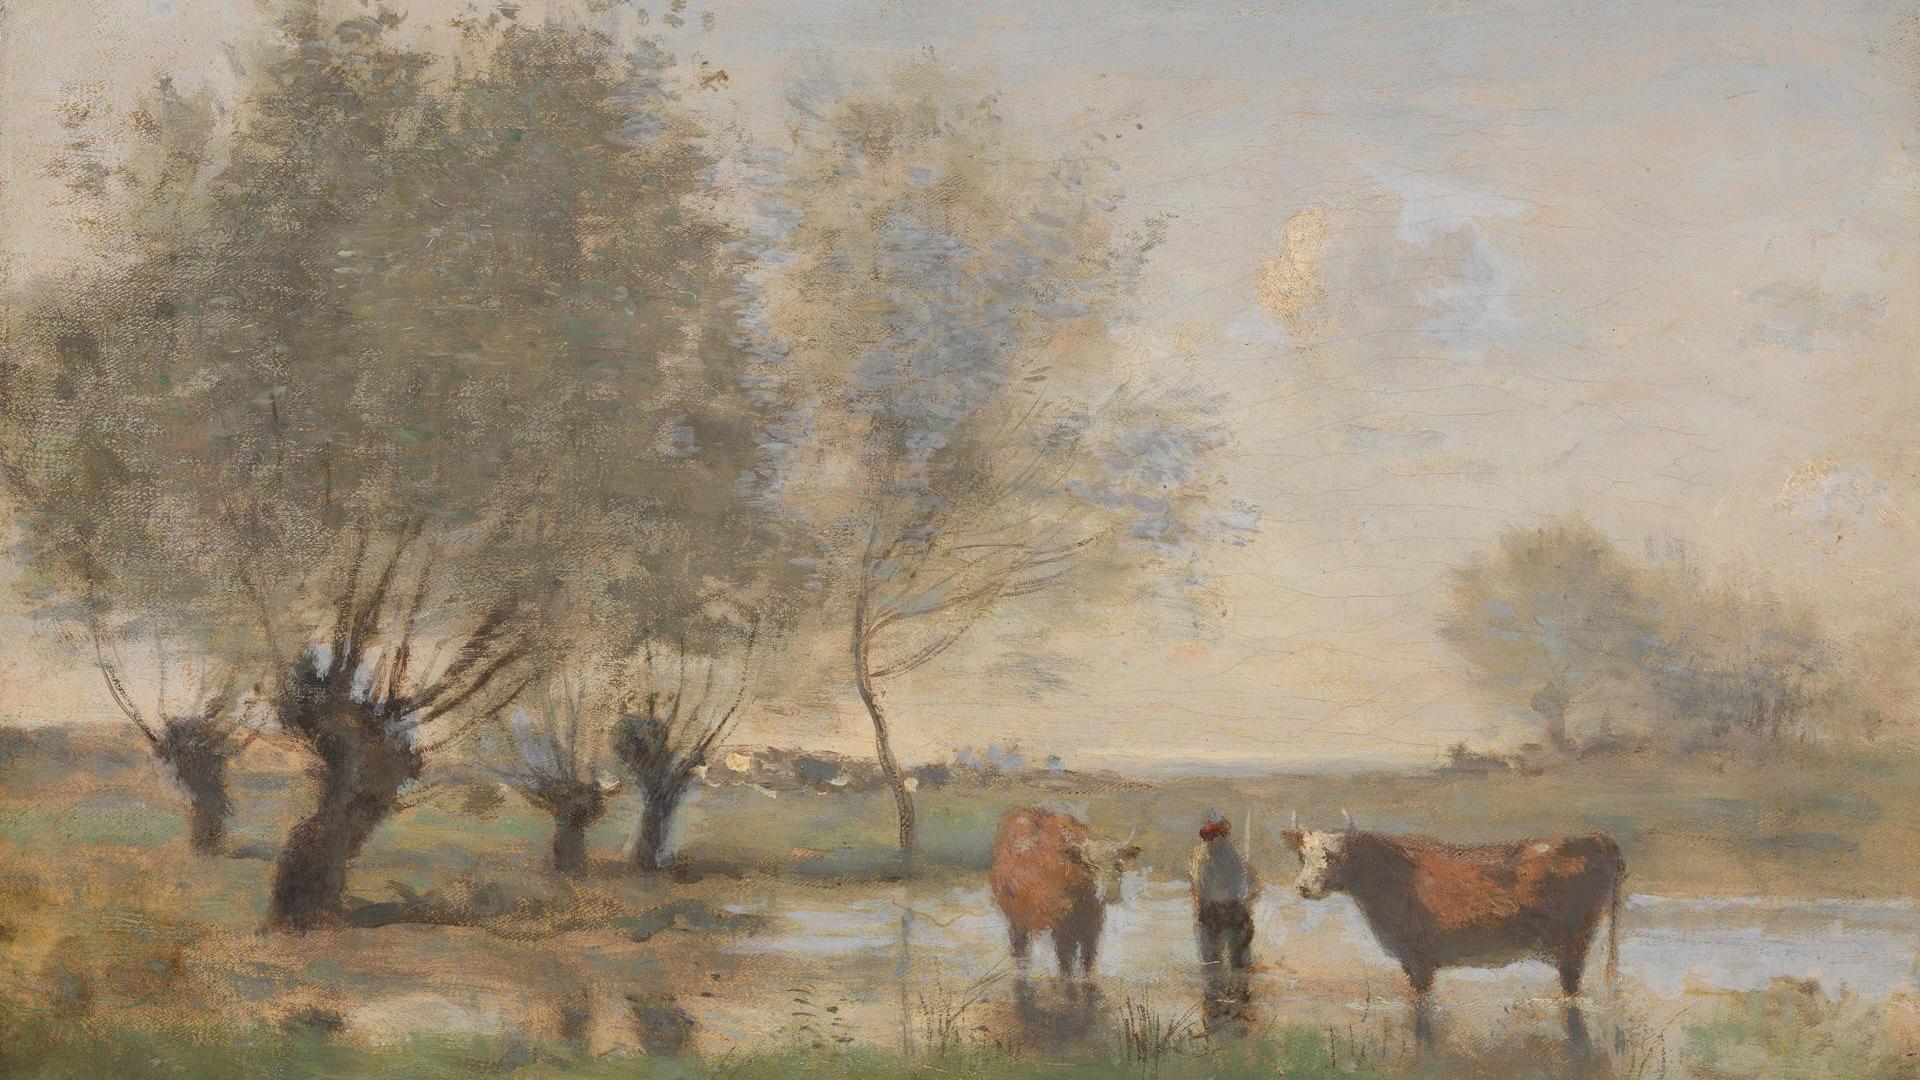 Cows in a Marshy Landscape by Jean-Baptiste-Camille Corot